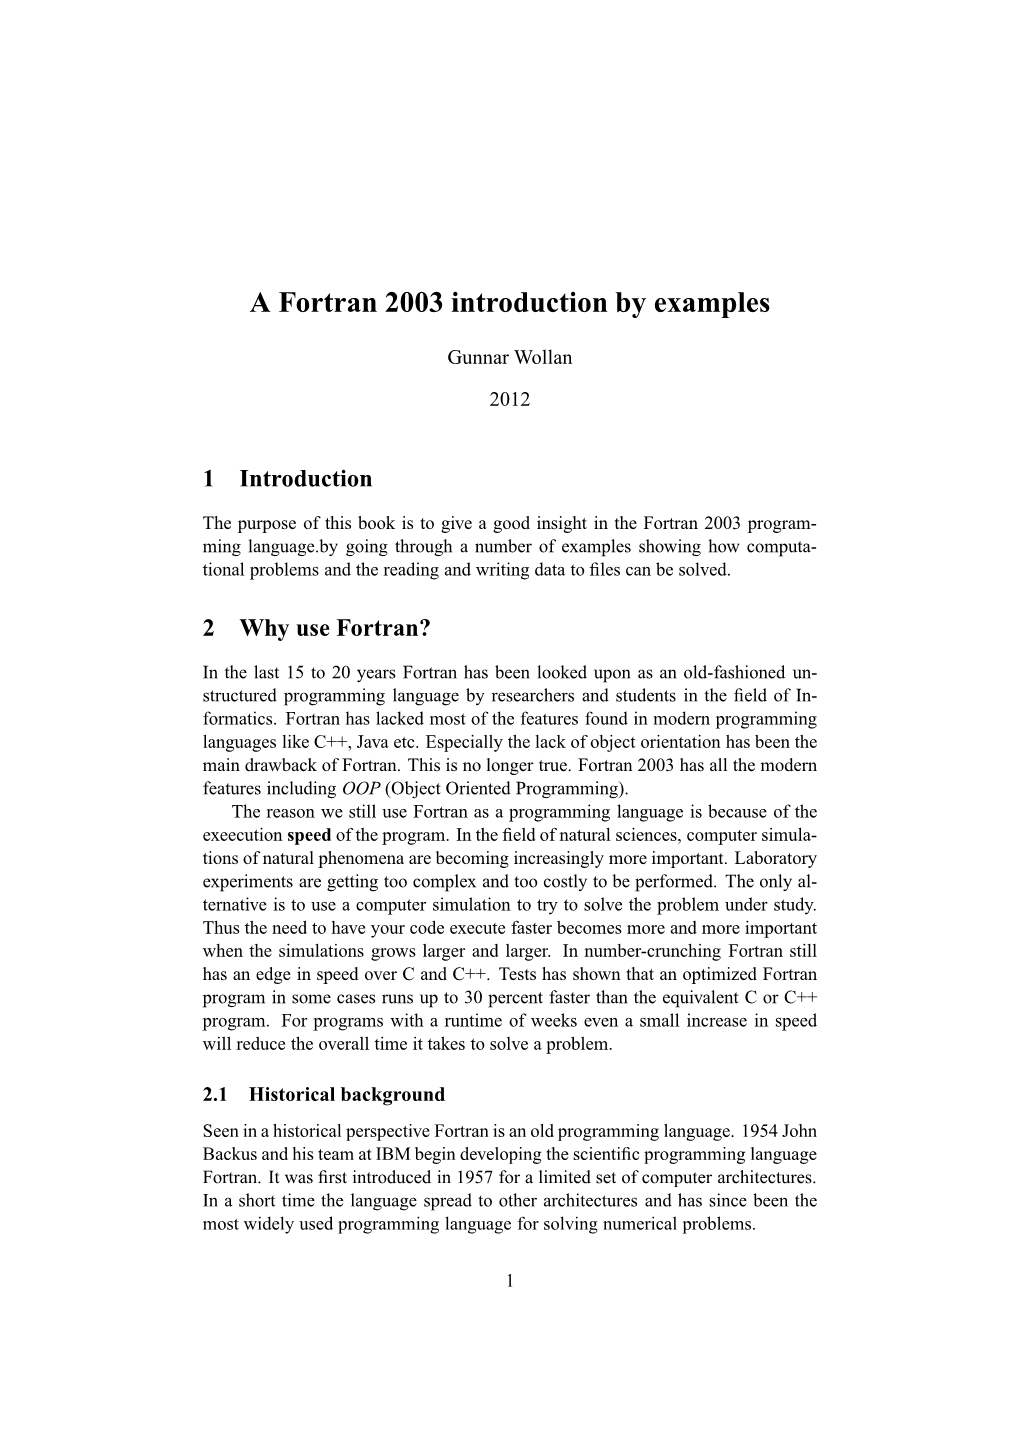 A Fortran 2003 Introduction by Examples